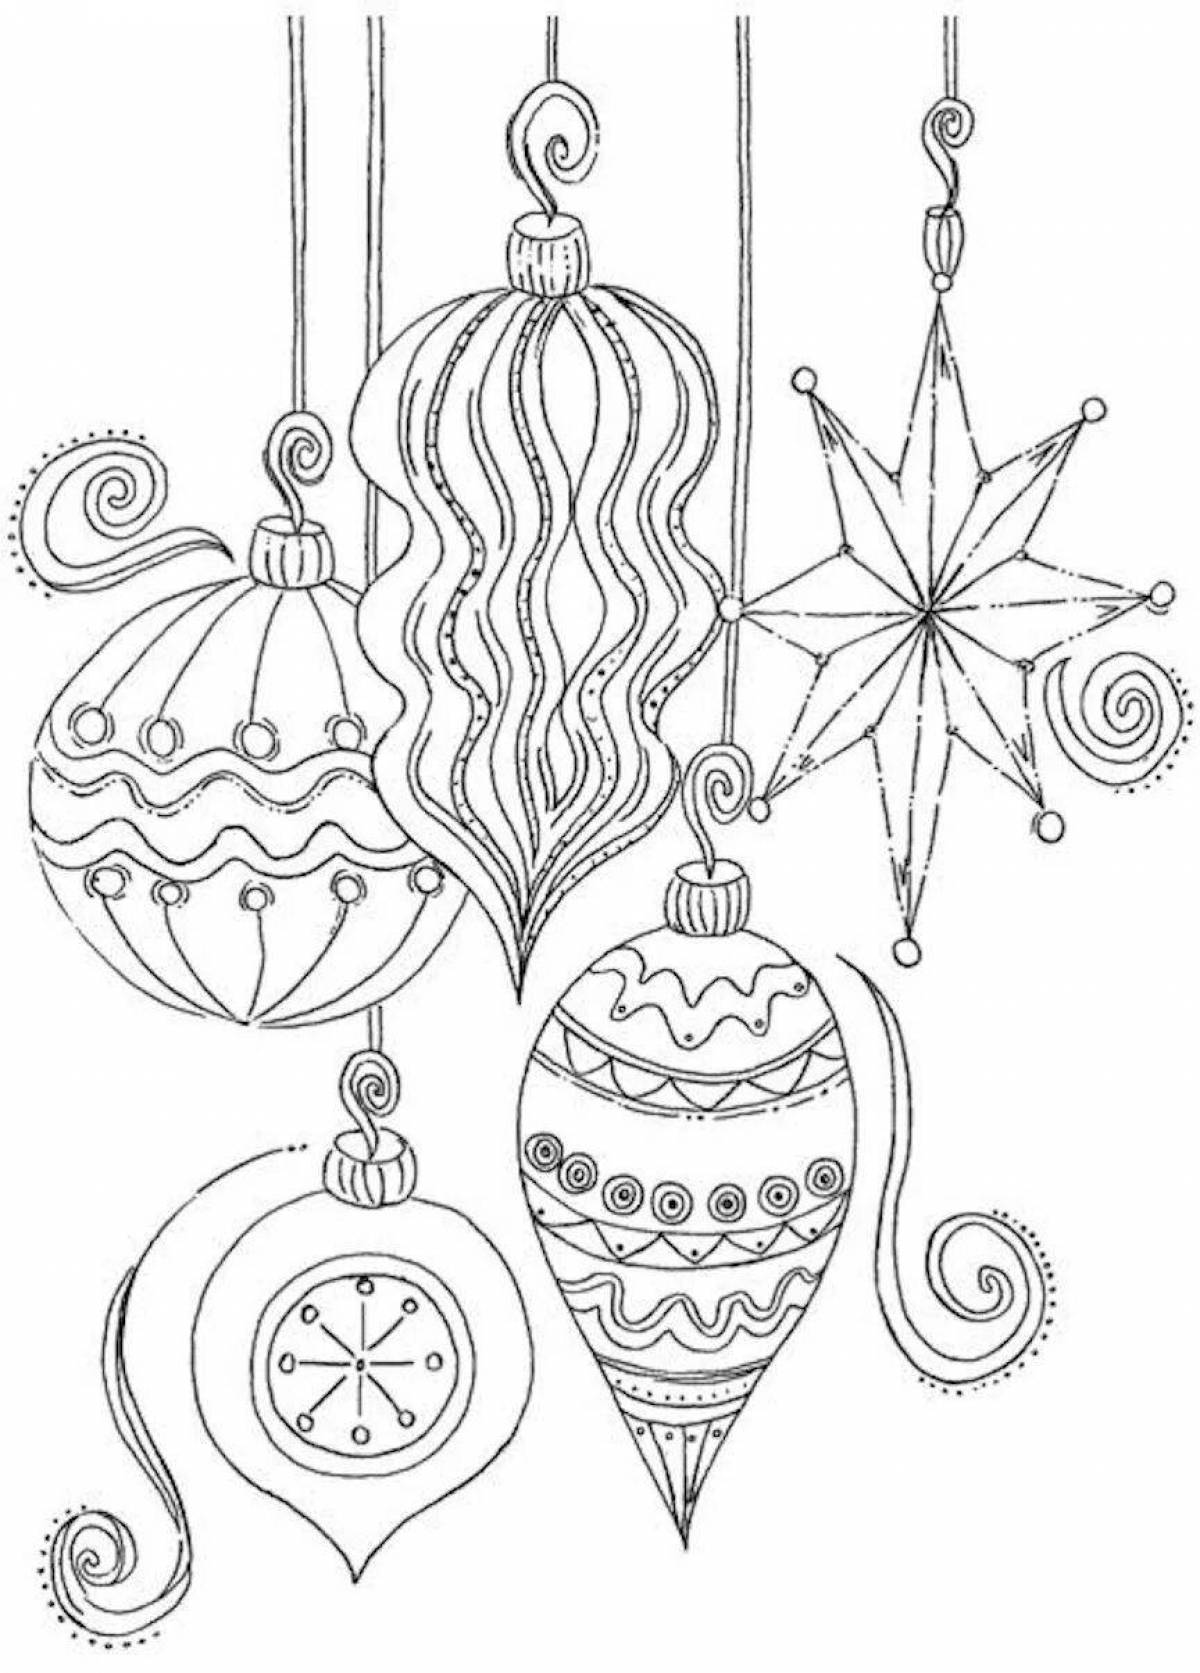 Luminous Christmas decorations coloring pages